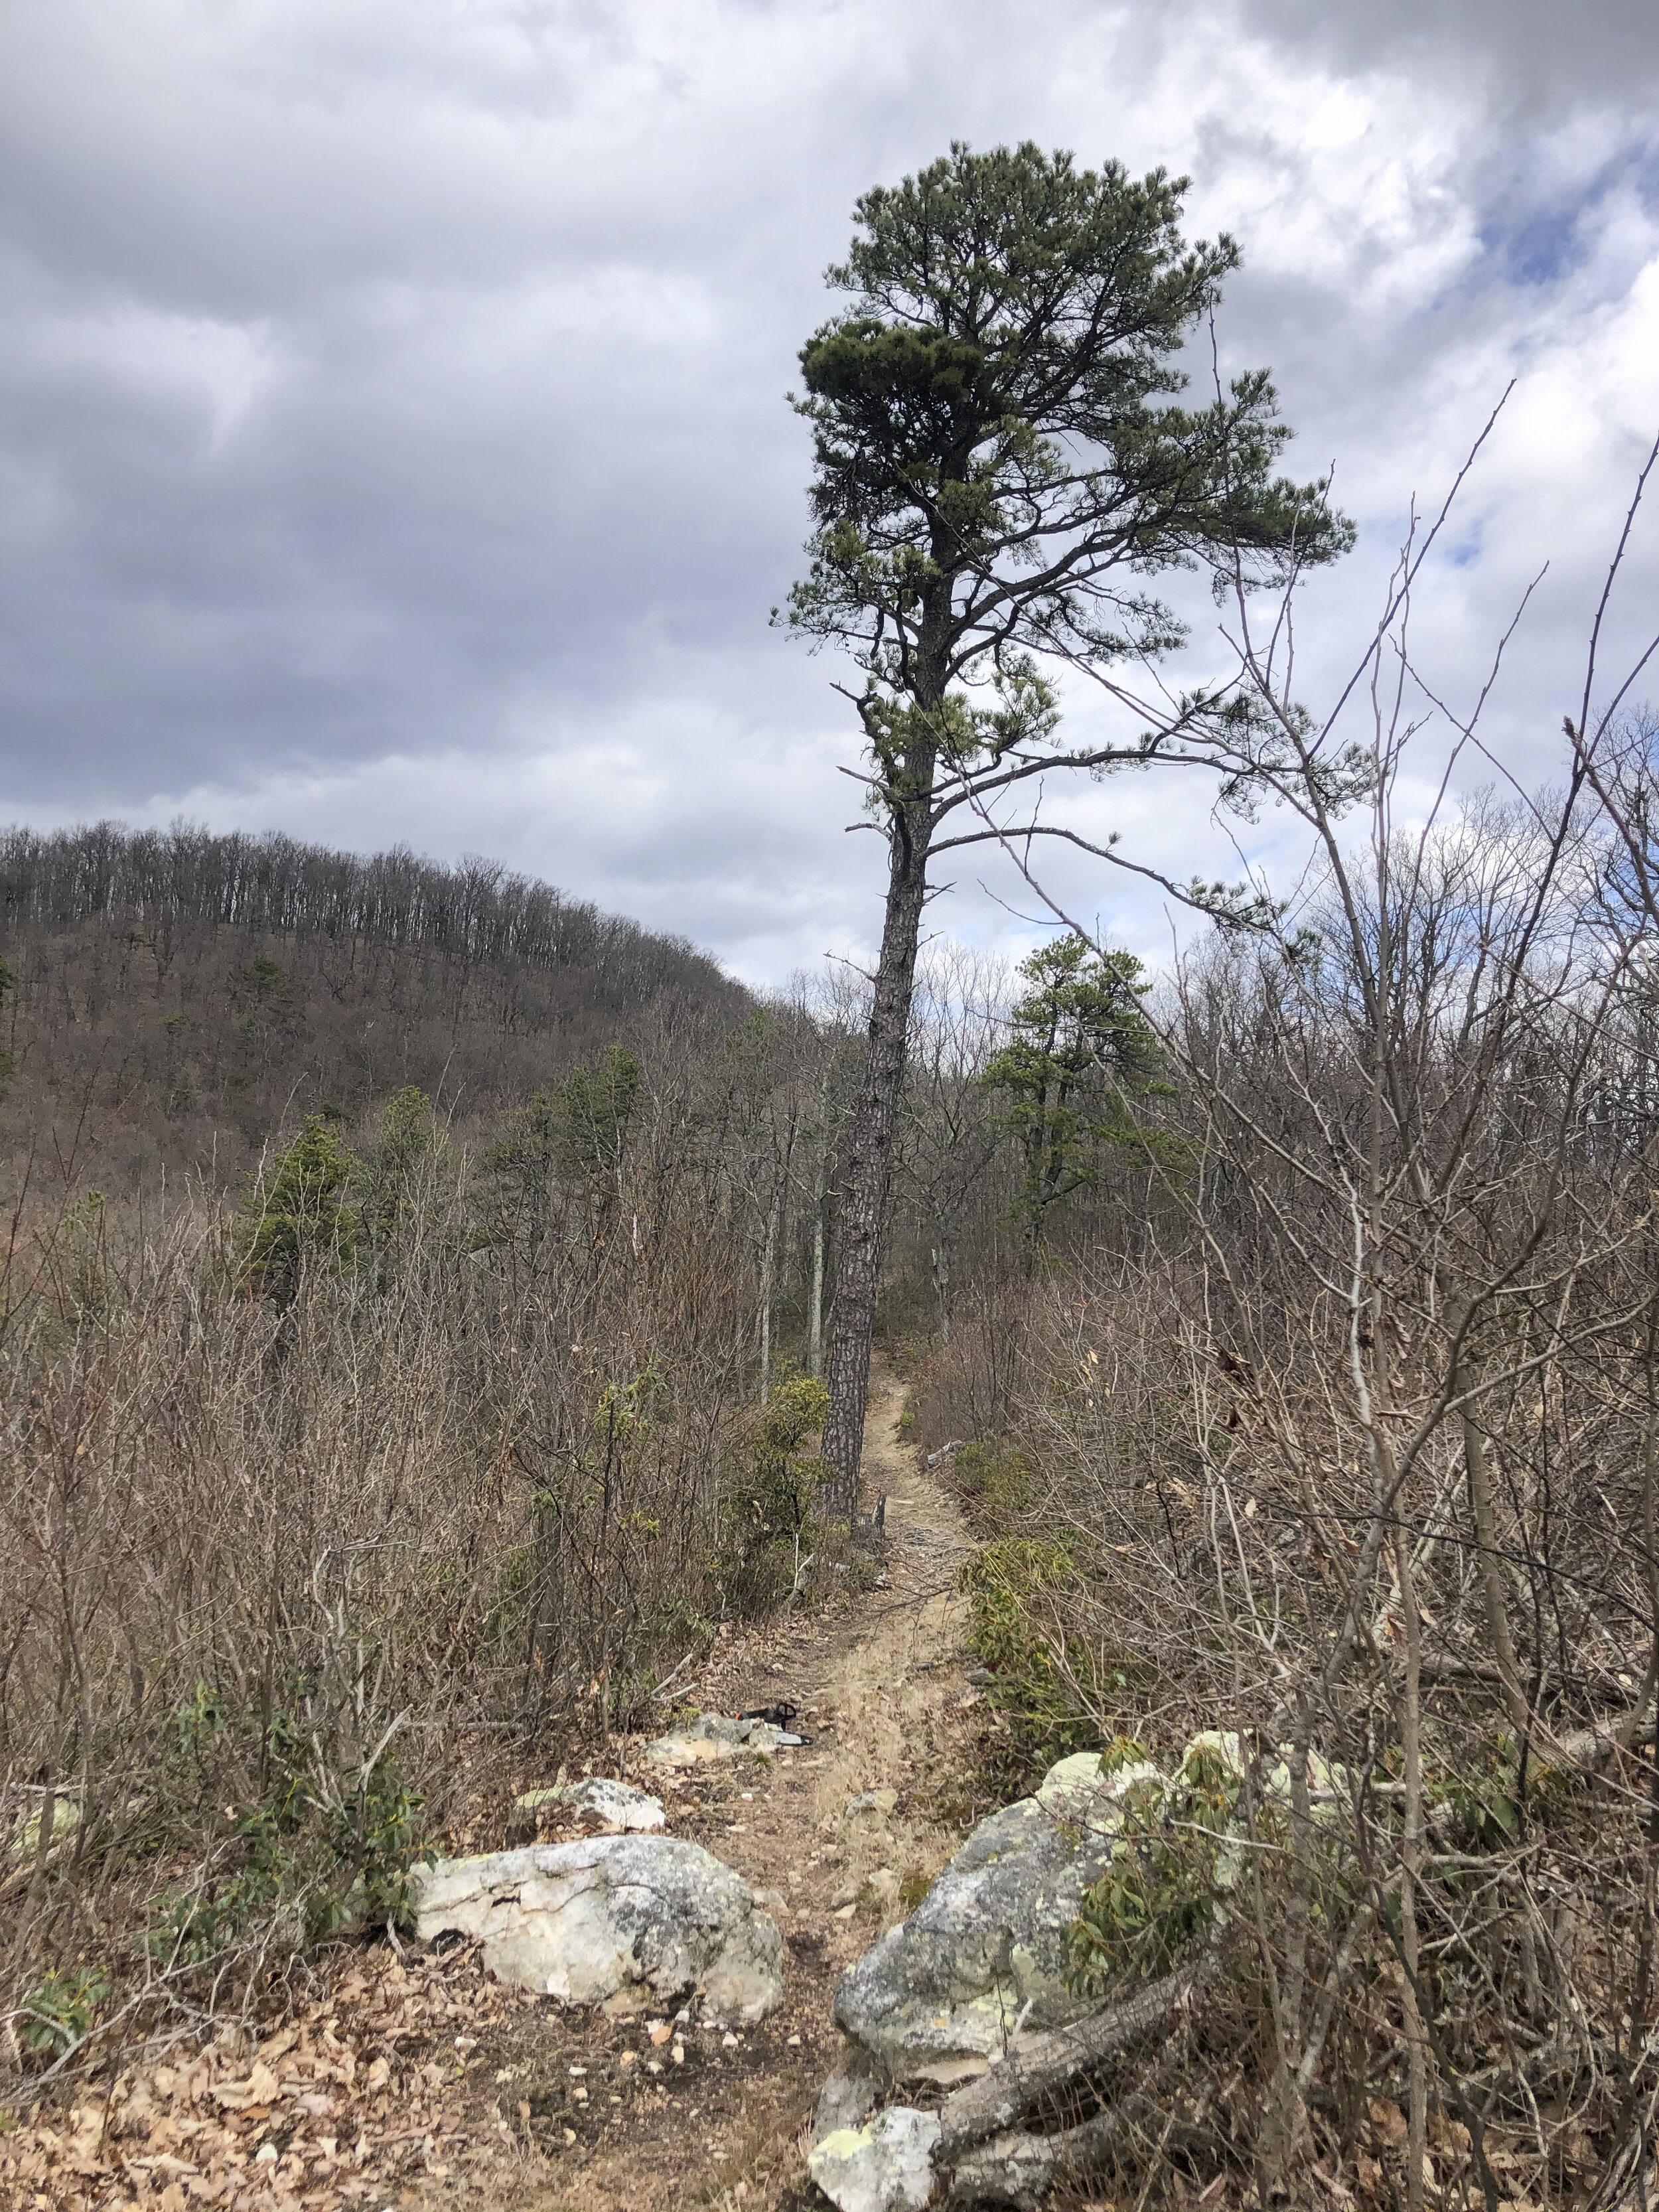  Crossing the Appalachian trail while clearing a vista in Virginia 